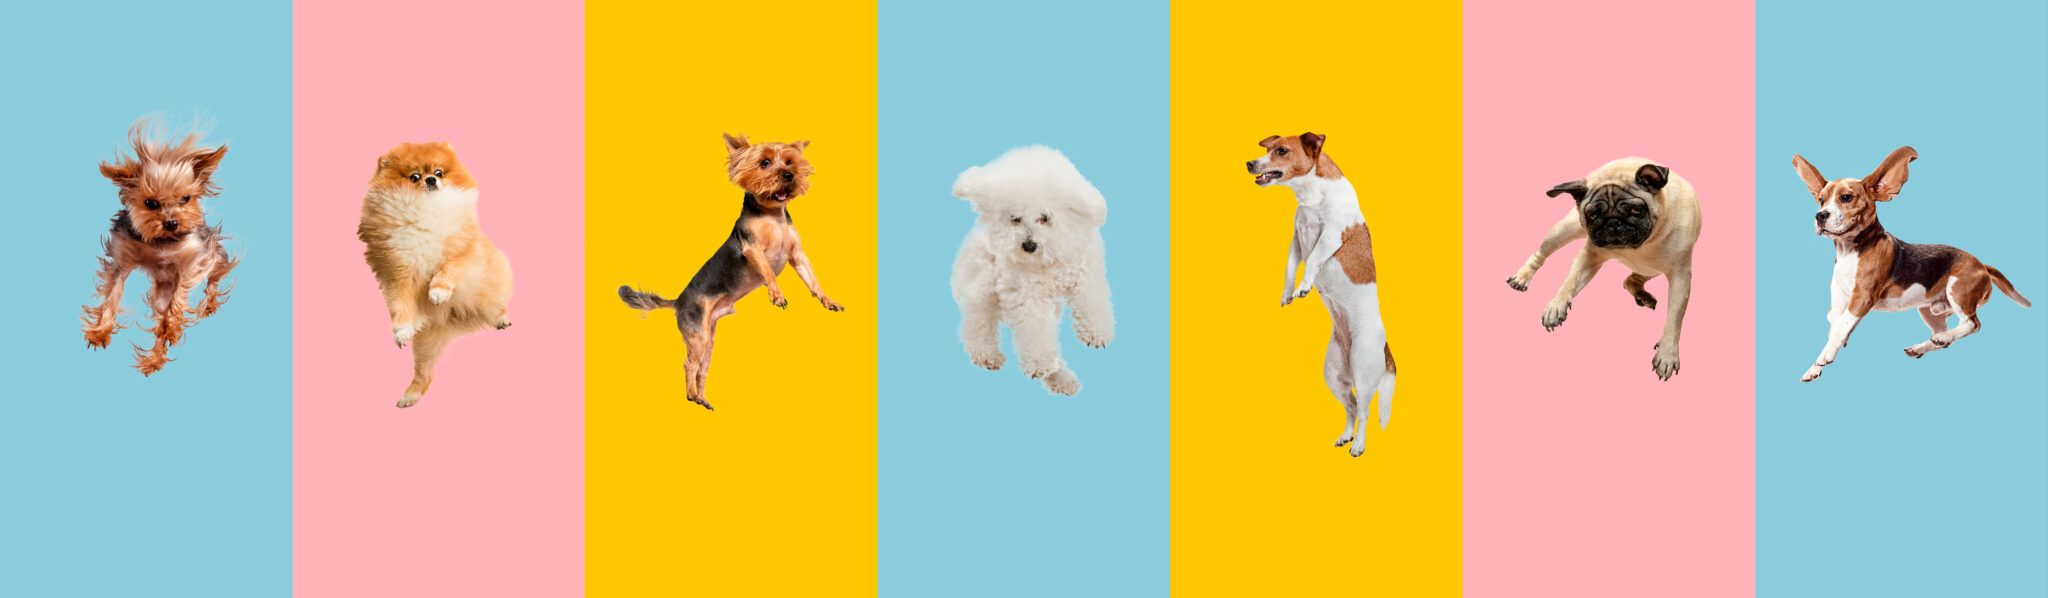 Dogs jumping in the air with colorful backgrounds.